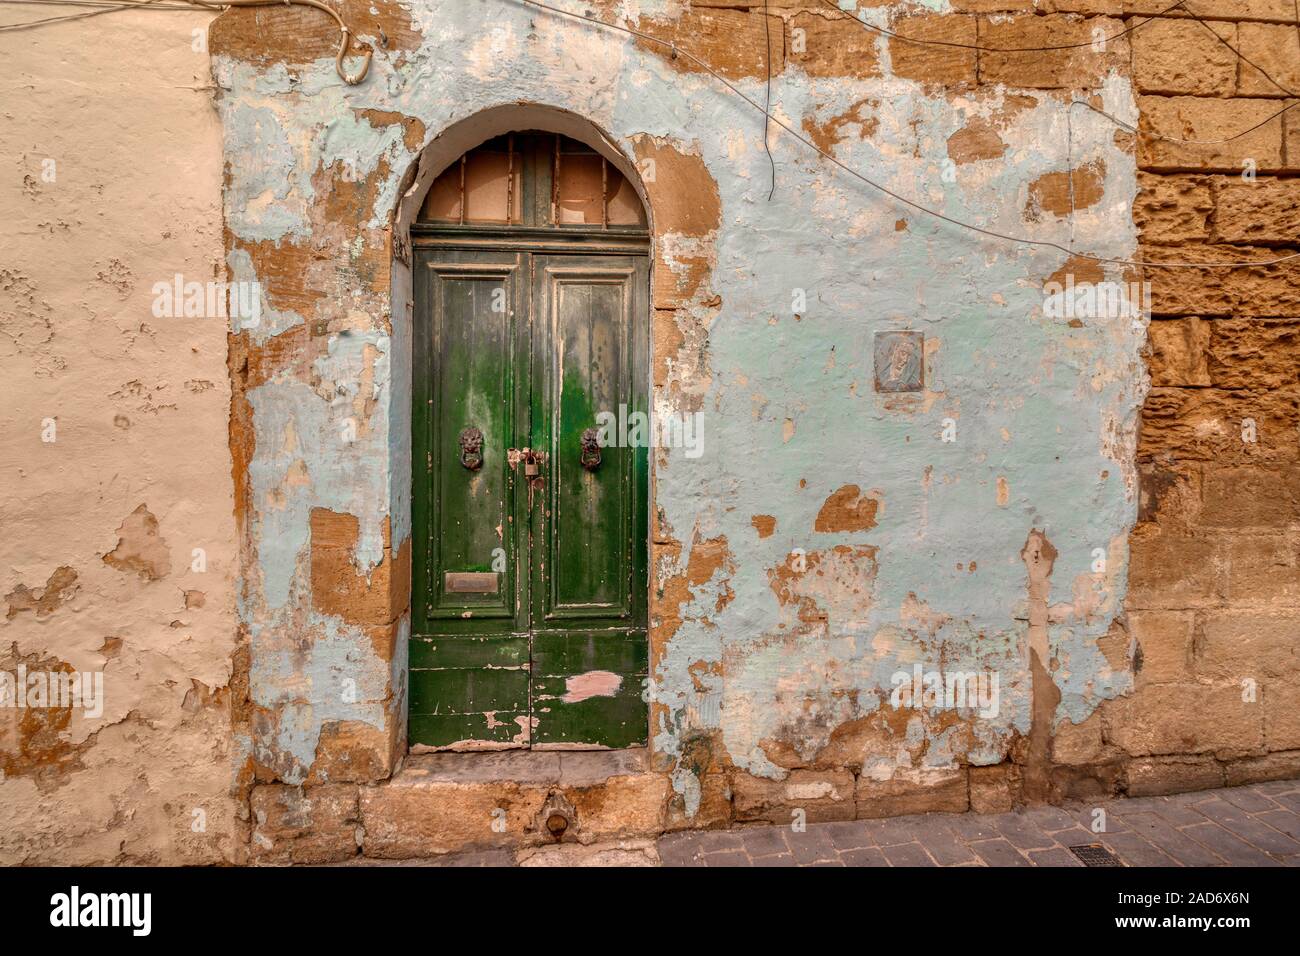 Badly Eroded And Weathered Painted Green Double Door Entrance To A